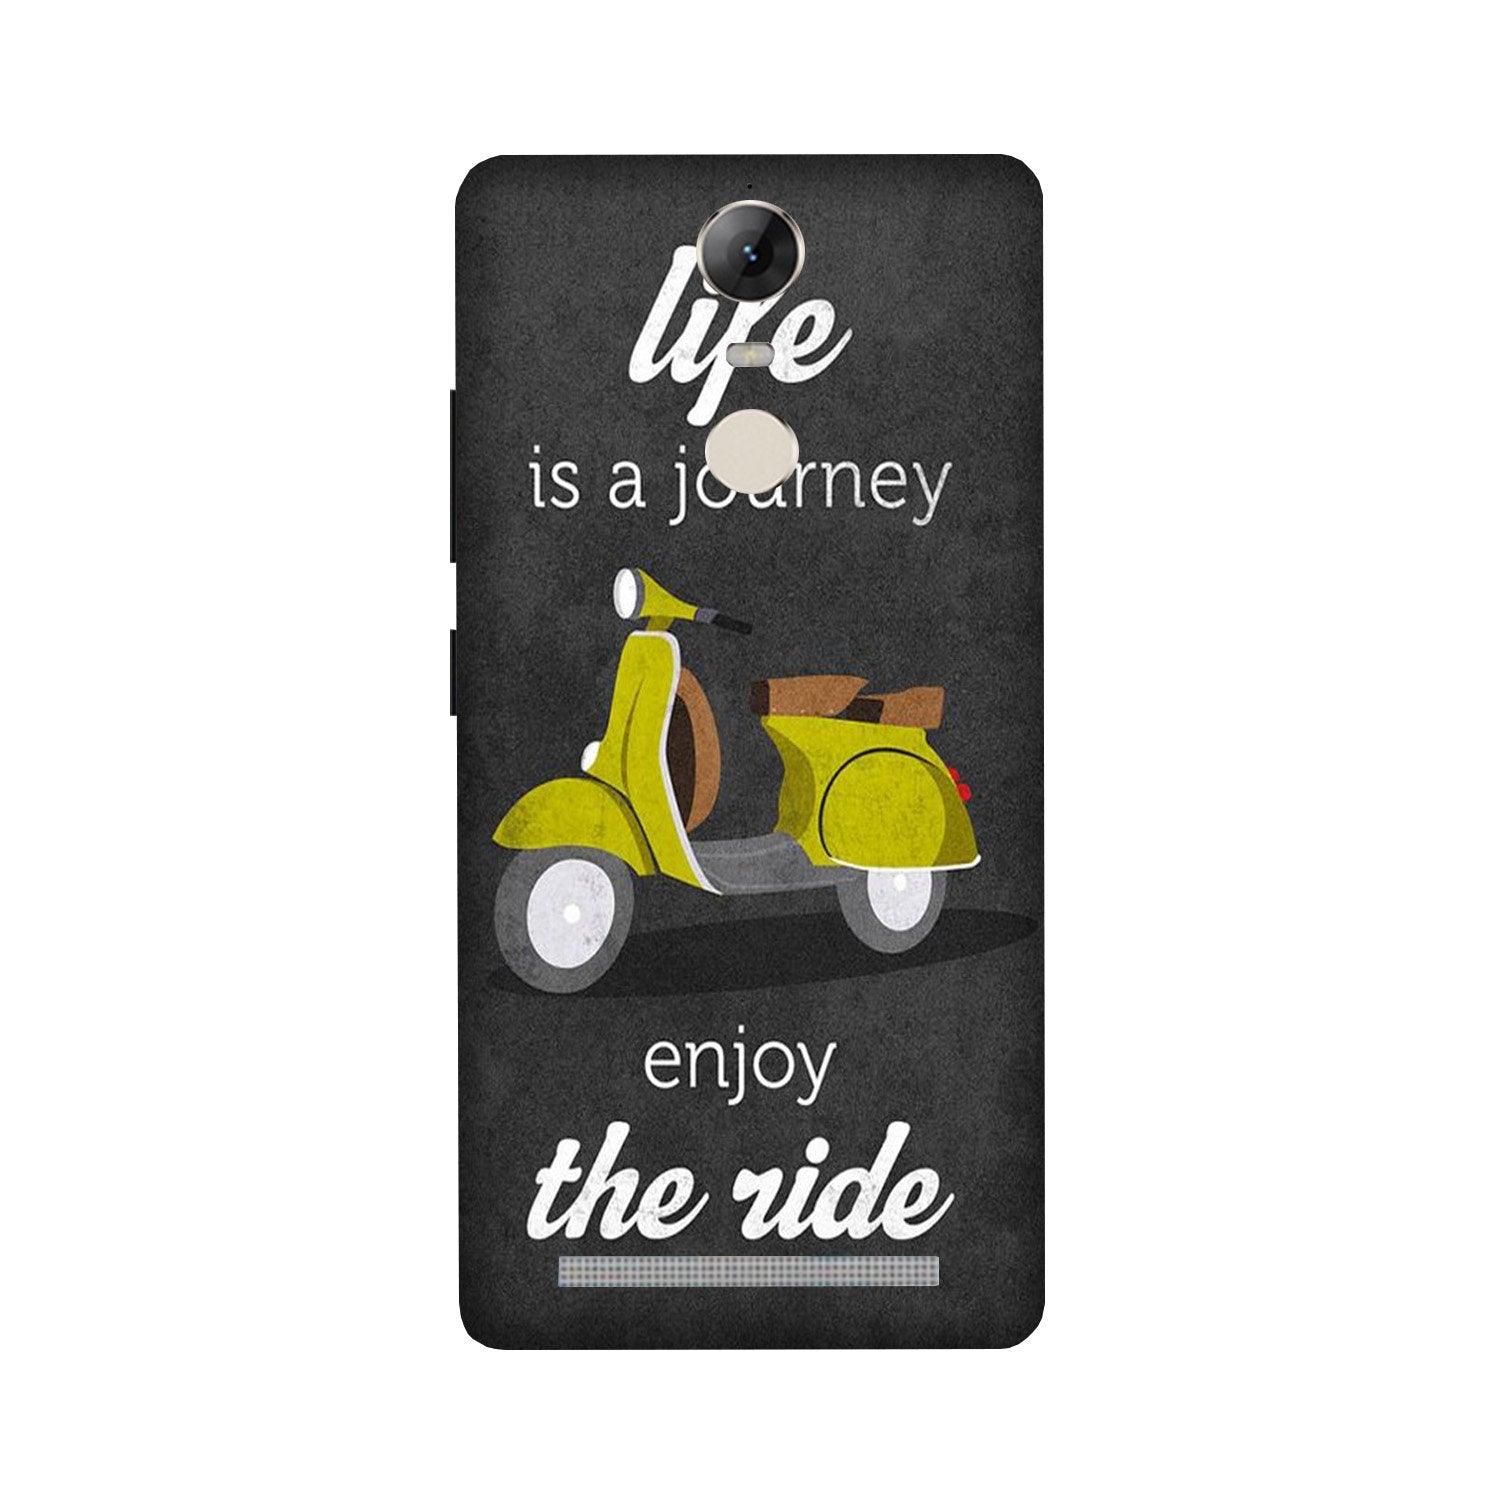 Life is a Journey Case for Lenovo Vibe K5 Note (Design No. 261)